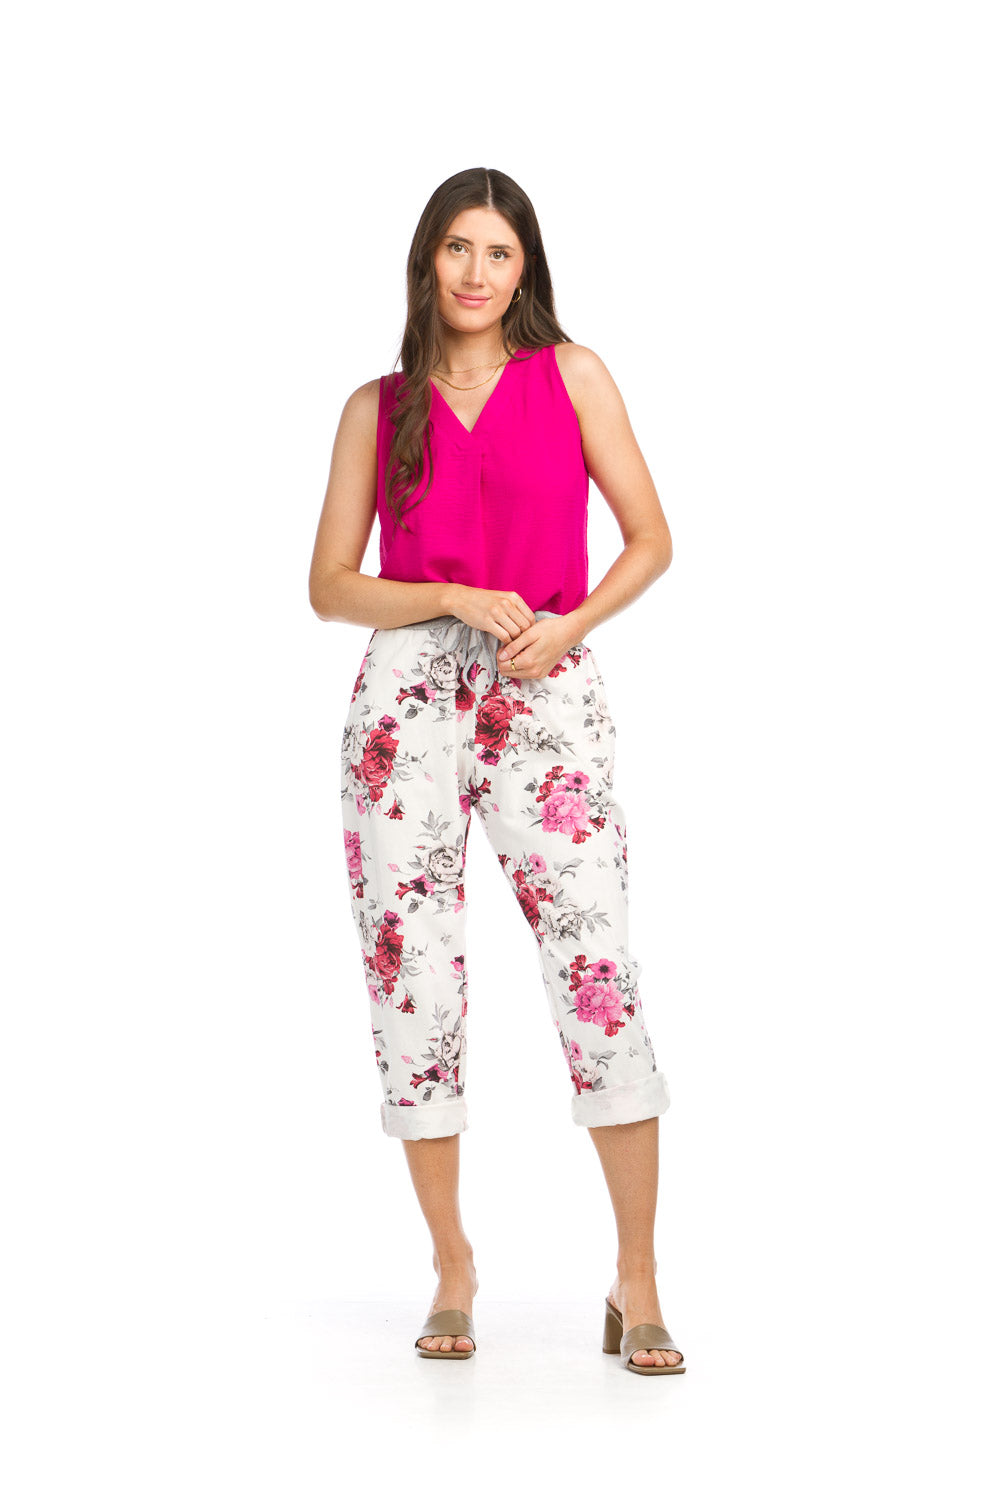 PP-16825 - FLORAL STRETCH COTTON BLEND PANTS WITH ELASTIC WAISTBAND